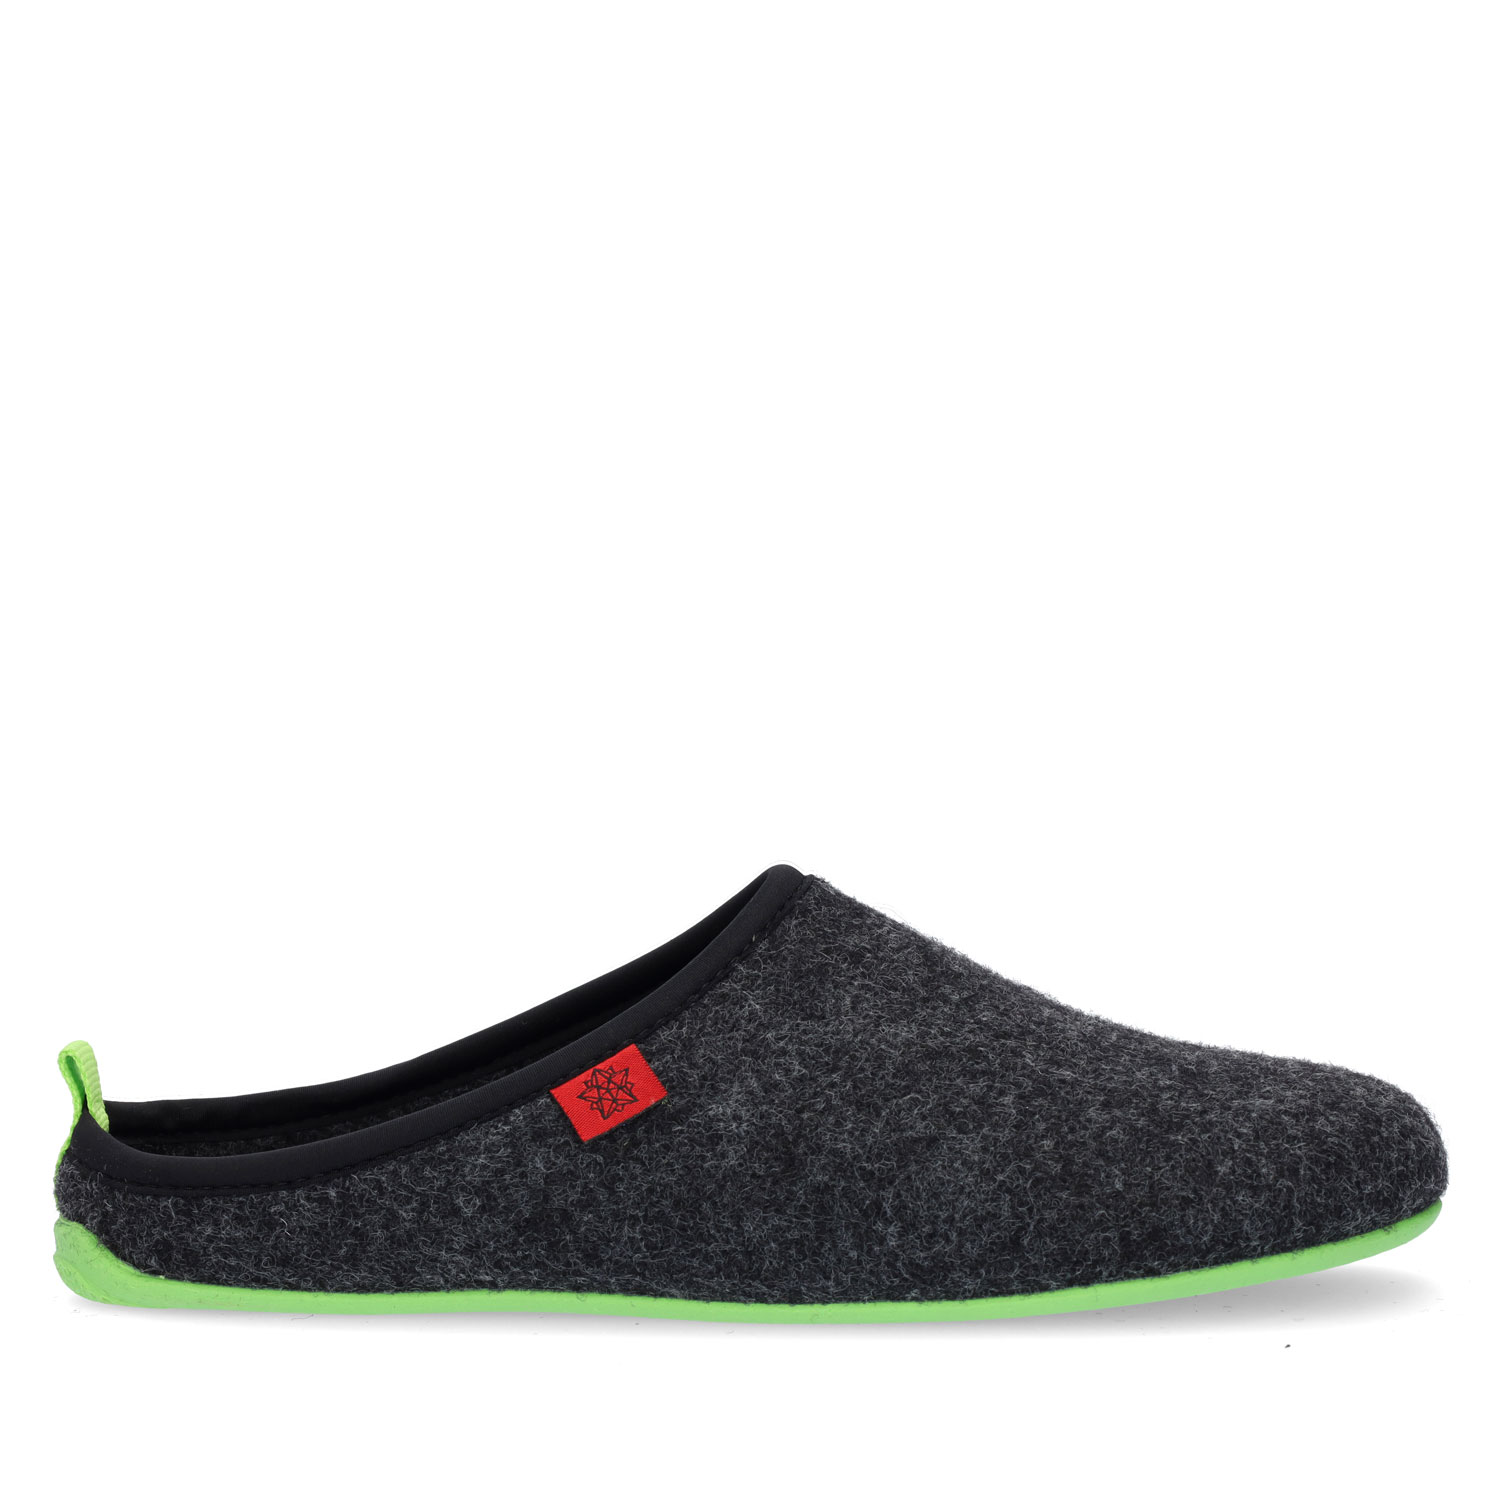 Unisex Black Felt Slippers with Green sole 